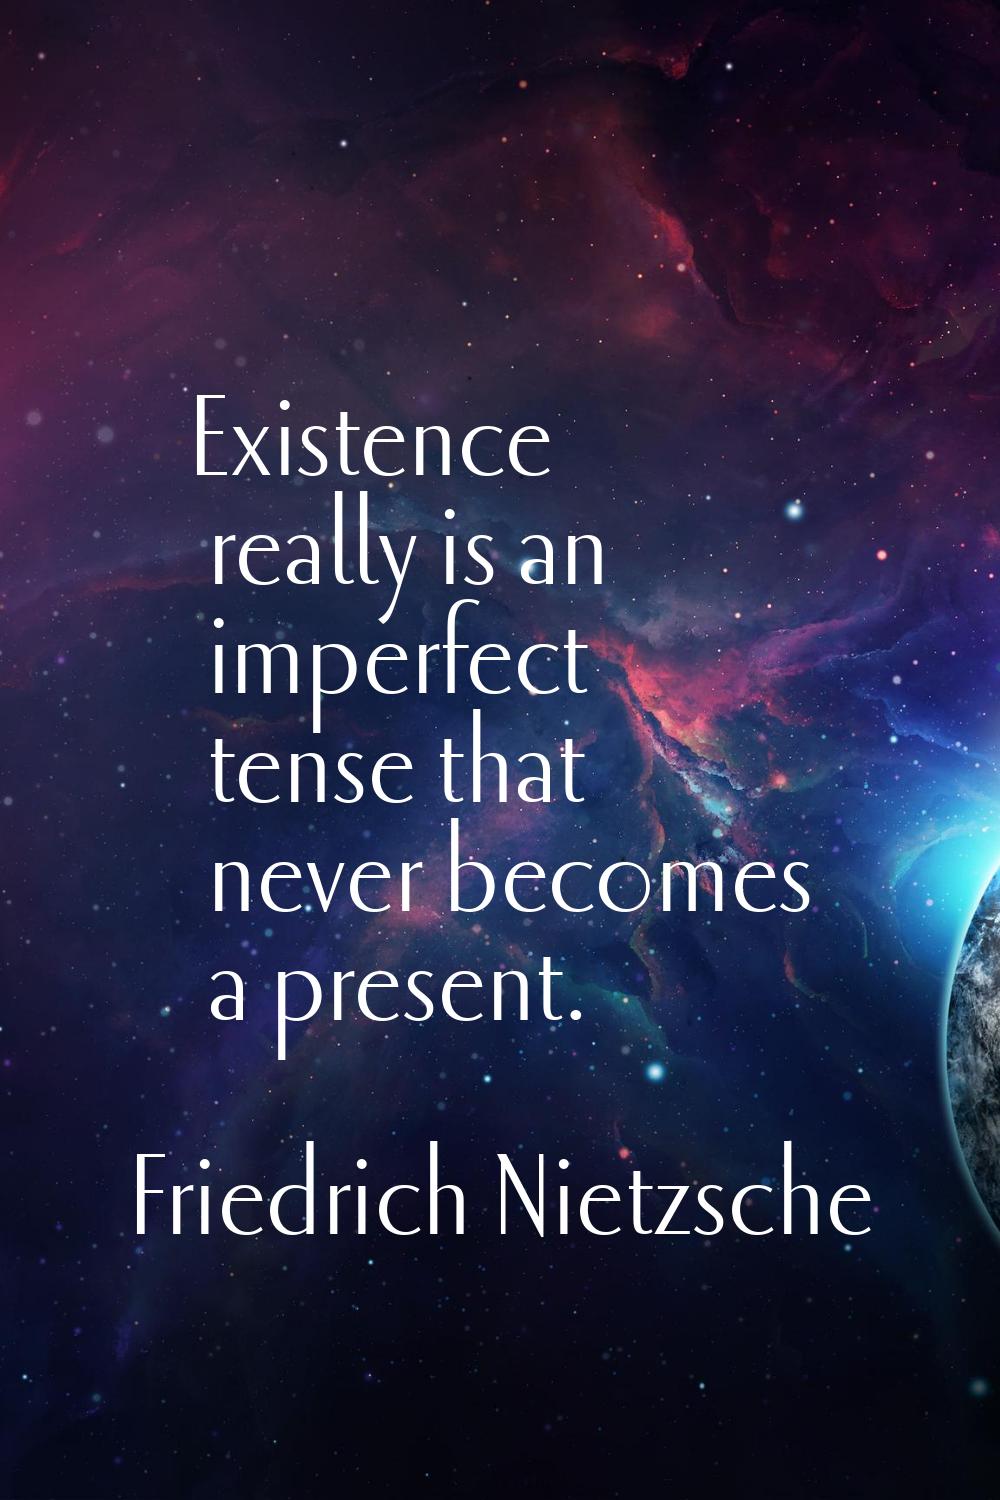 Existence really is an imperfect tense that never becomes a present.